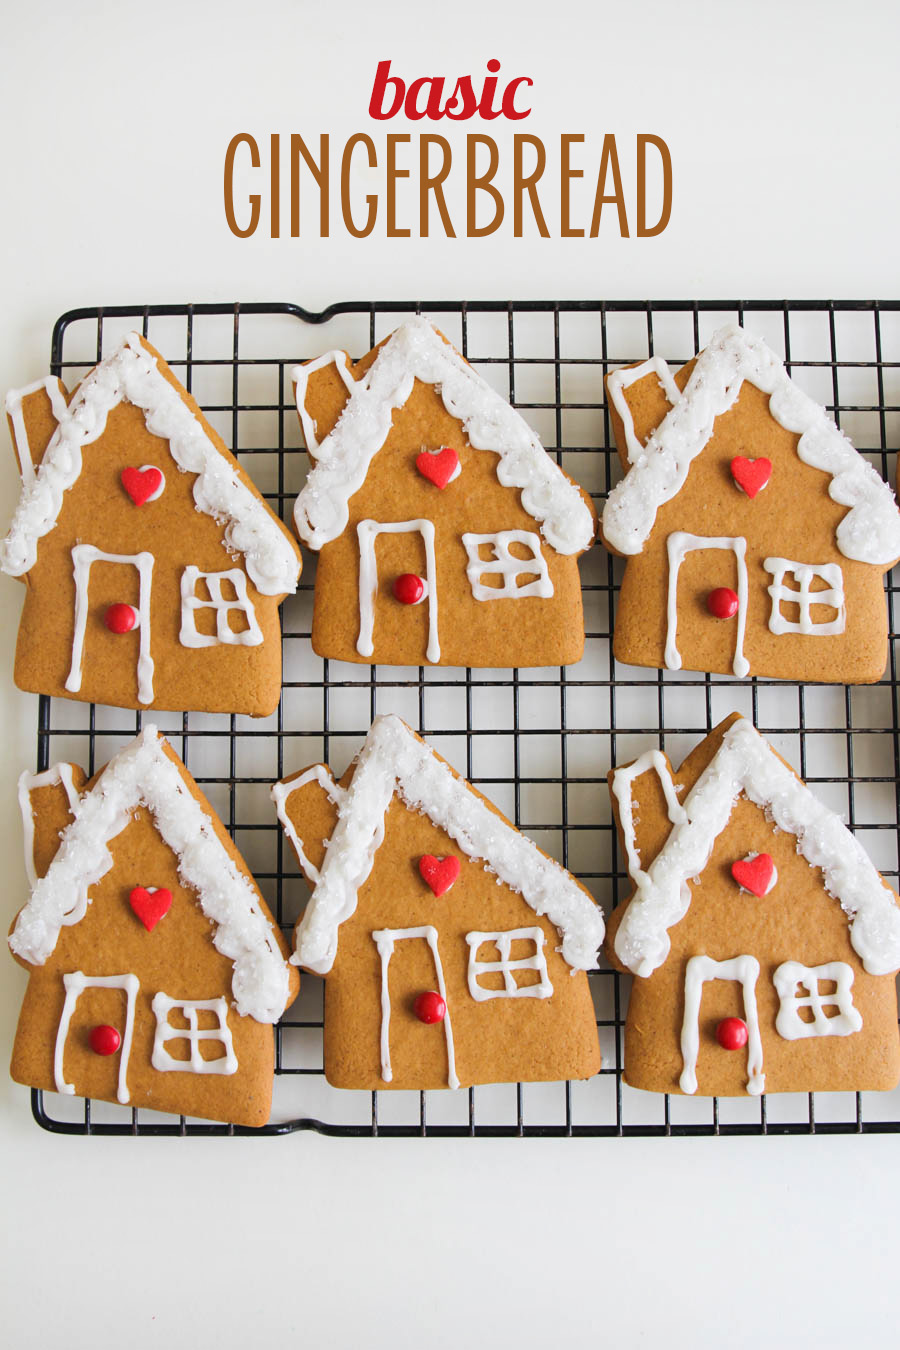 These basic gingerbread cookies are so soft, and perfect for decorating! They're lightly sweetened with the perfect hint of spice!